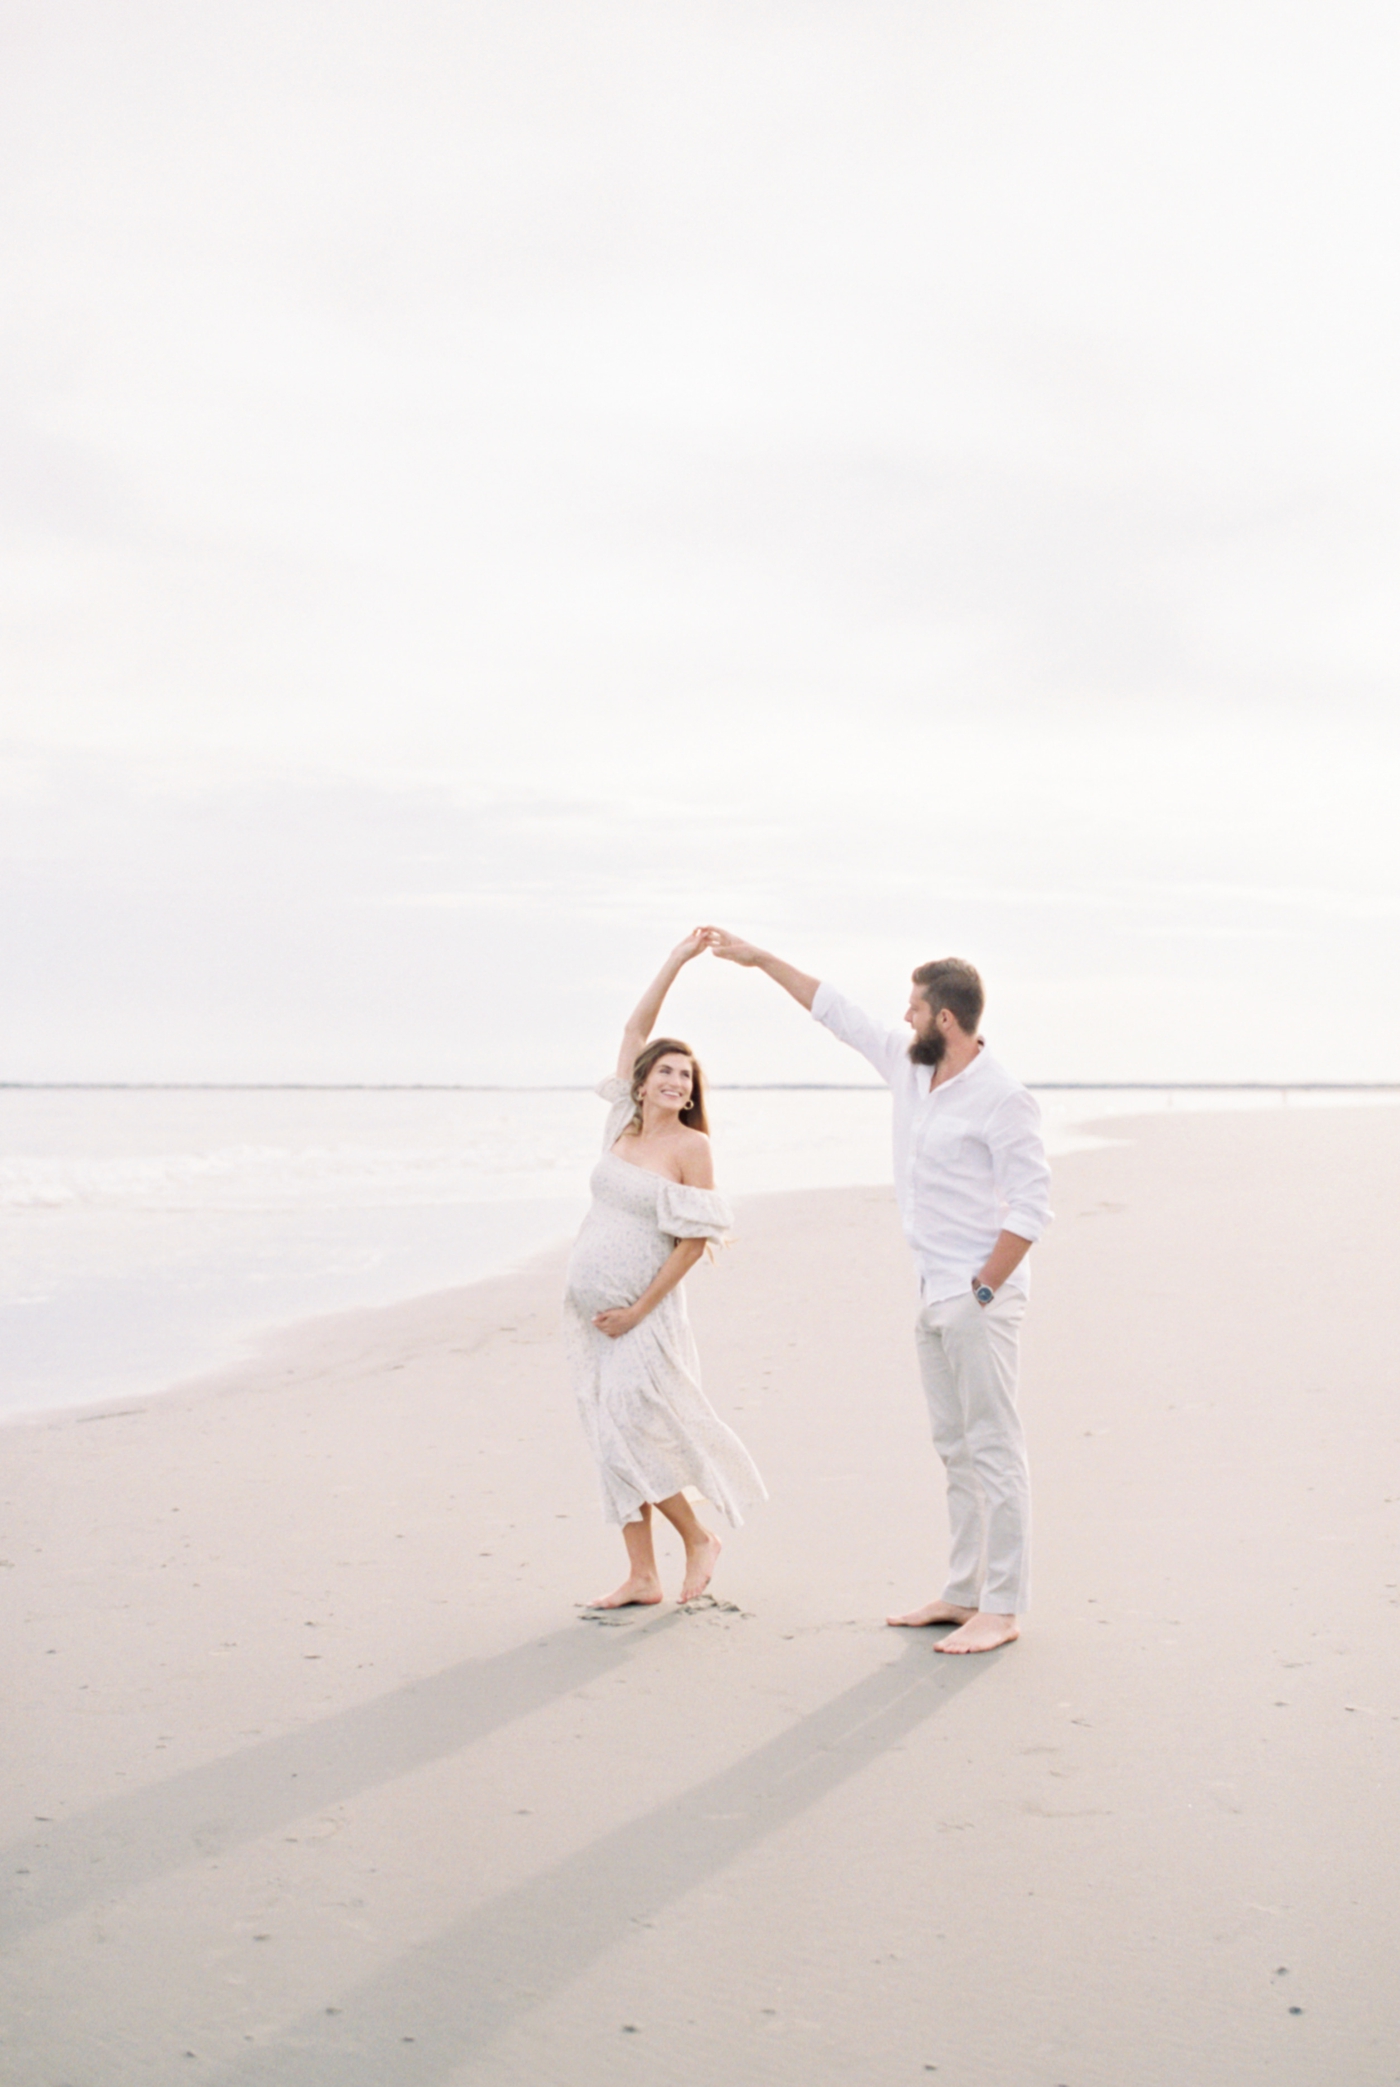 Film Images of couple dancing on the beach | Photo by Caitlyn Motycka Photography.